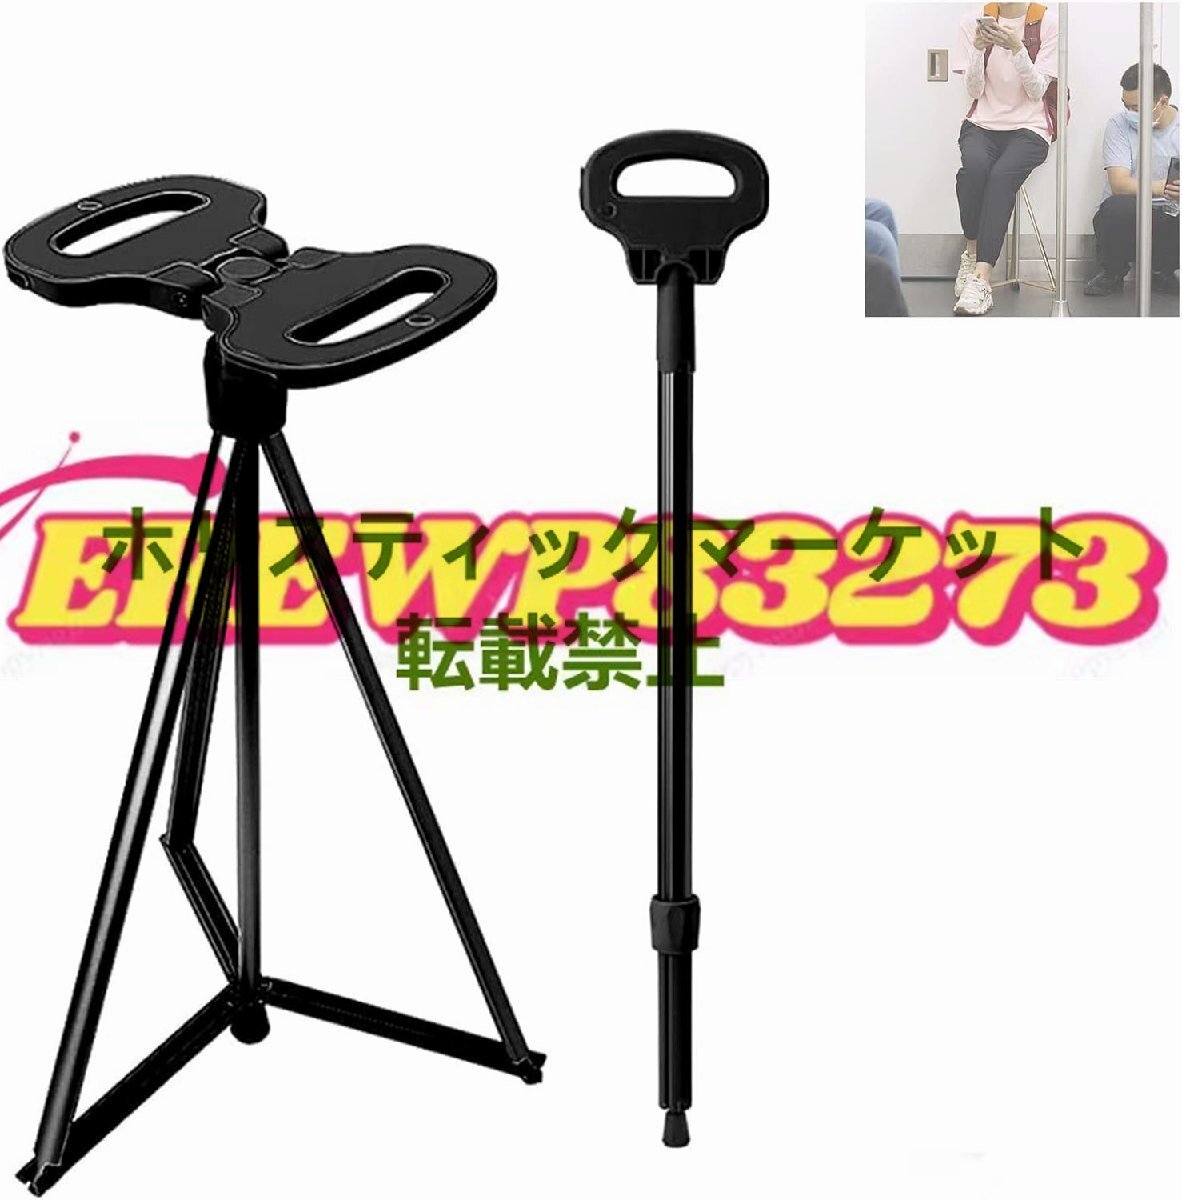  stick chair chair attaching cane mobile chair folding chair light weight nursing cane folding cane mountain climbing cane aluminium with massage function .